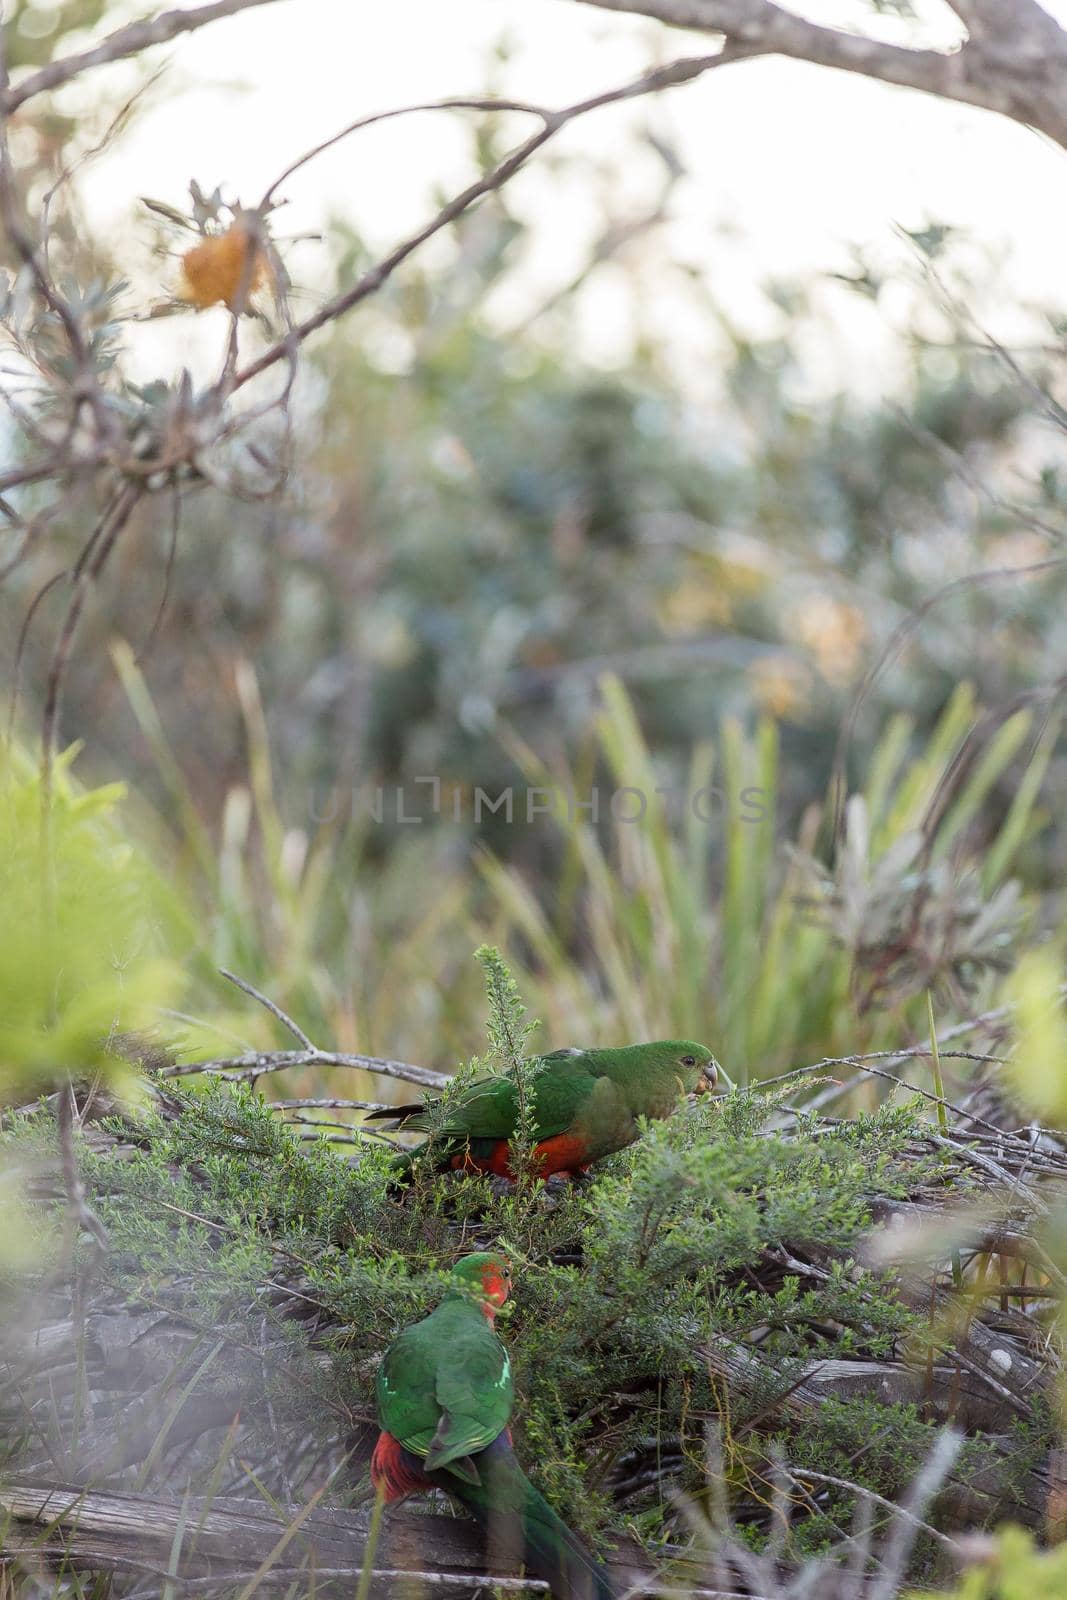 Australian King Parrot Perched in tree. High quality photo